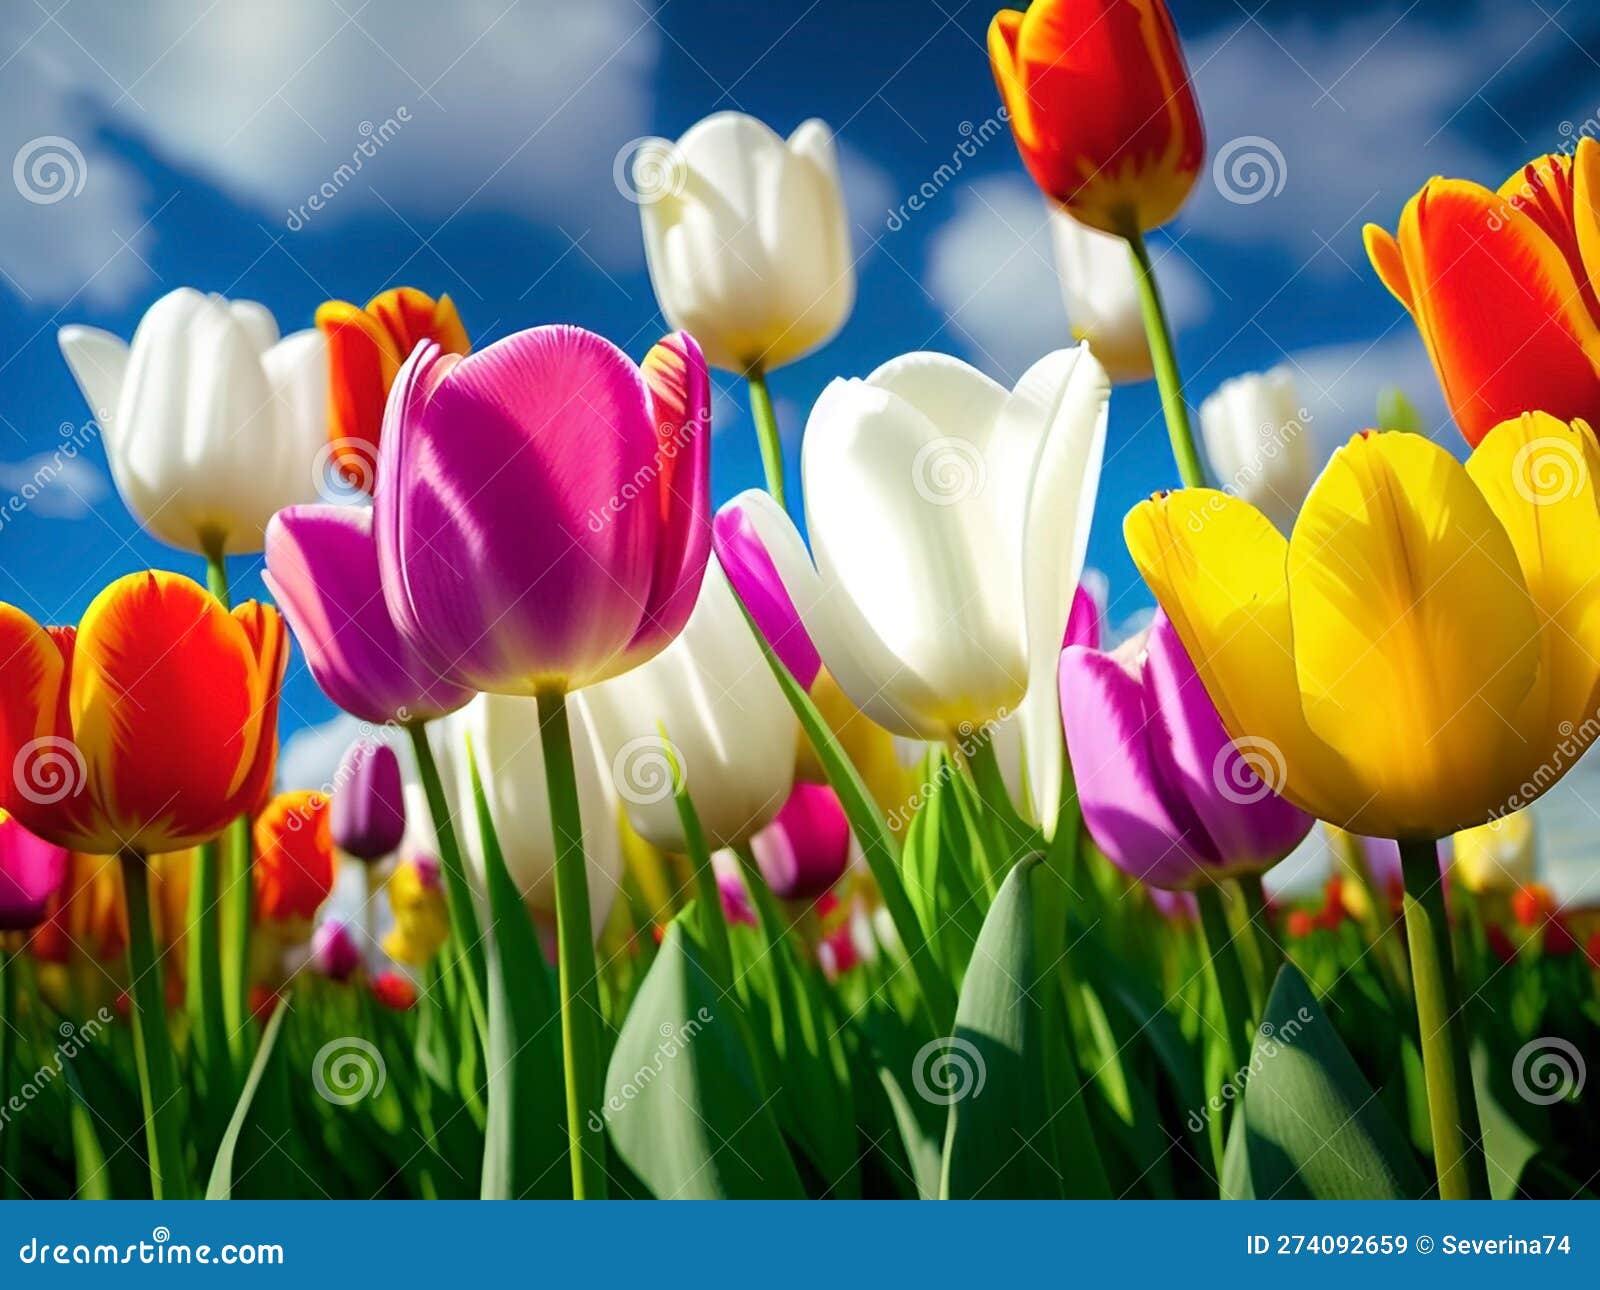 colorful tulips in a tulip field against blue sky at spring day. beautiful tulipanes flower for postcard